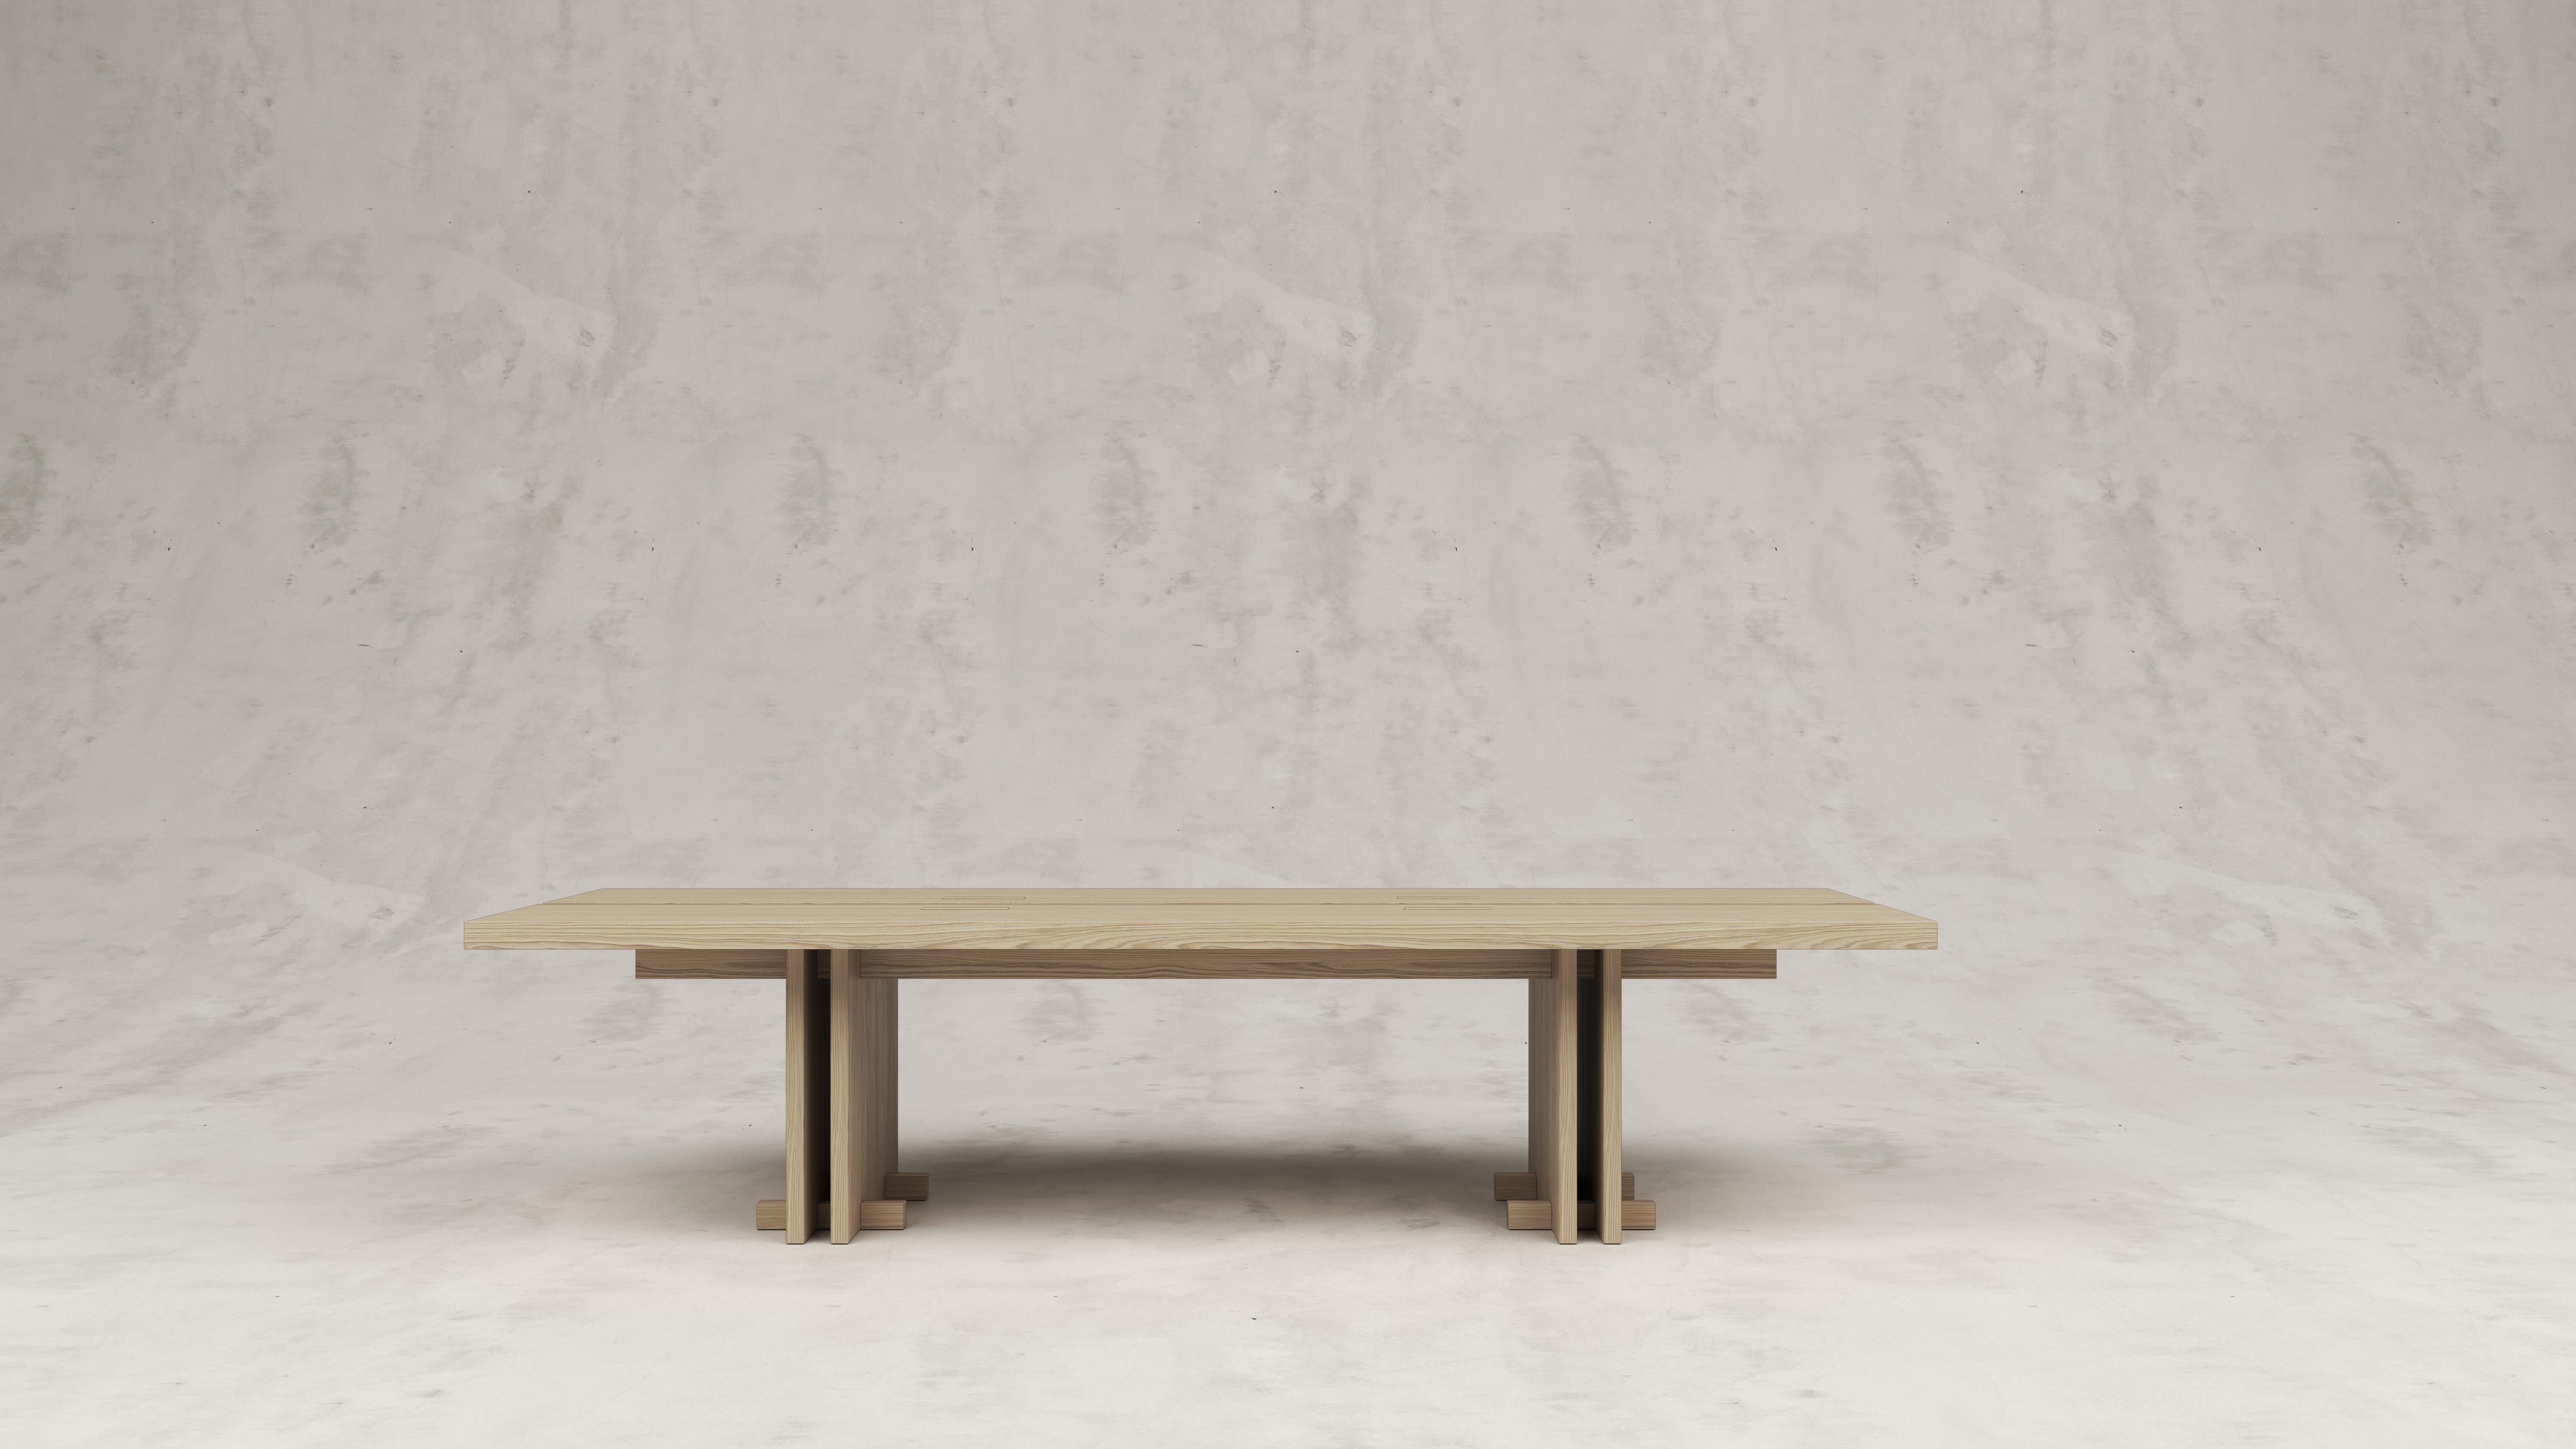 Rift wood dining table by Andy Kerstens
without little feet
Dimensions: W 240 x D 98 x H 74 cm
Materials: bleached oak
Optional little feet at table legs
Handmade in Belgium

Available in solid larch, oak and walnut and in 320 x 102 x 74 cm,